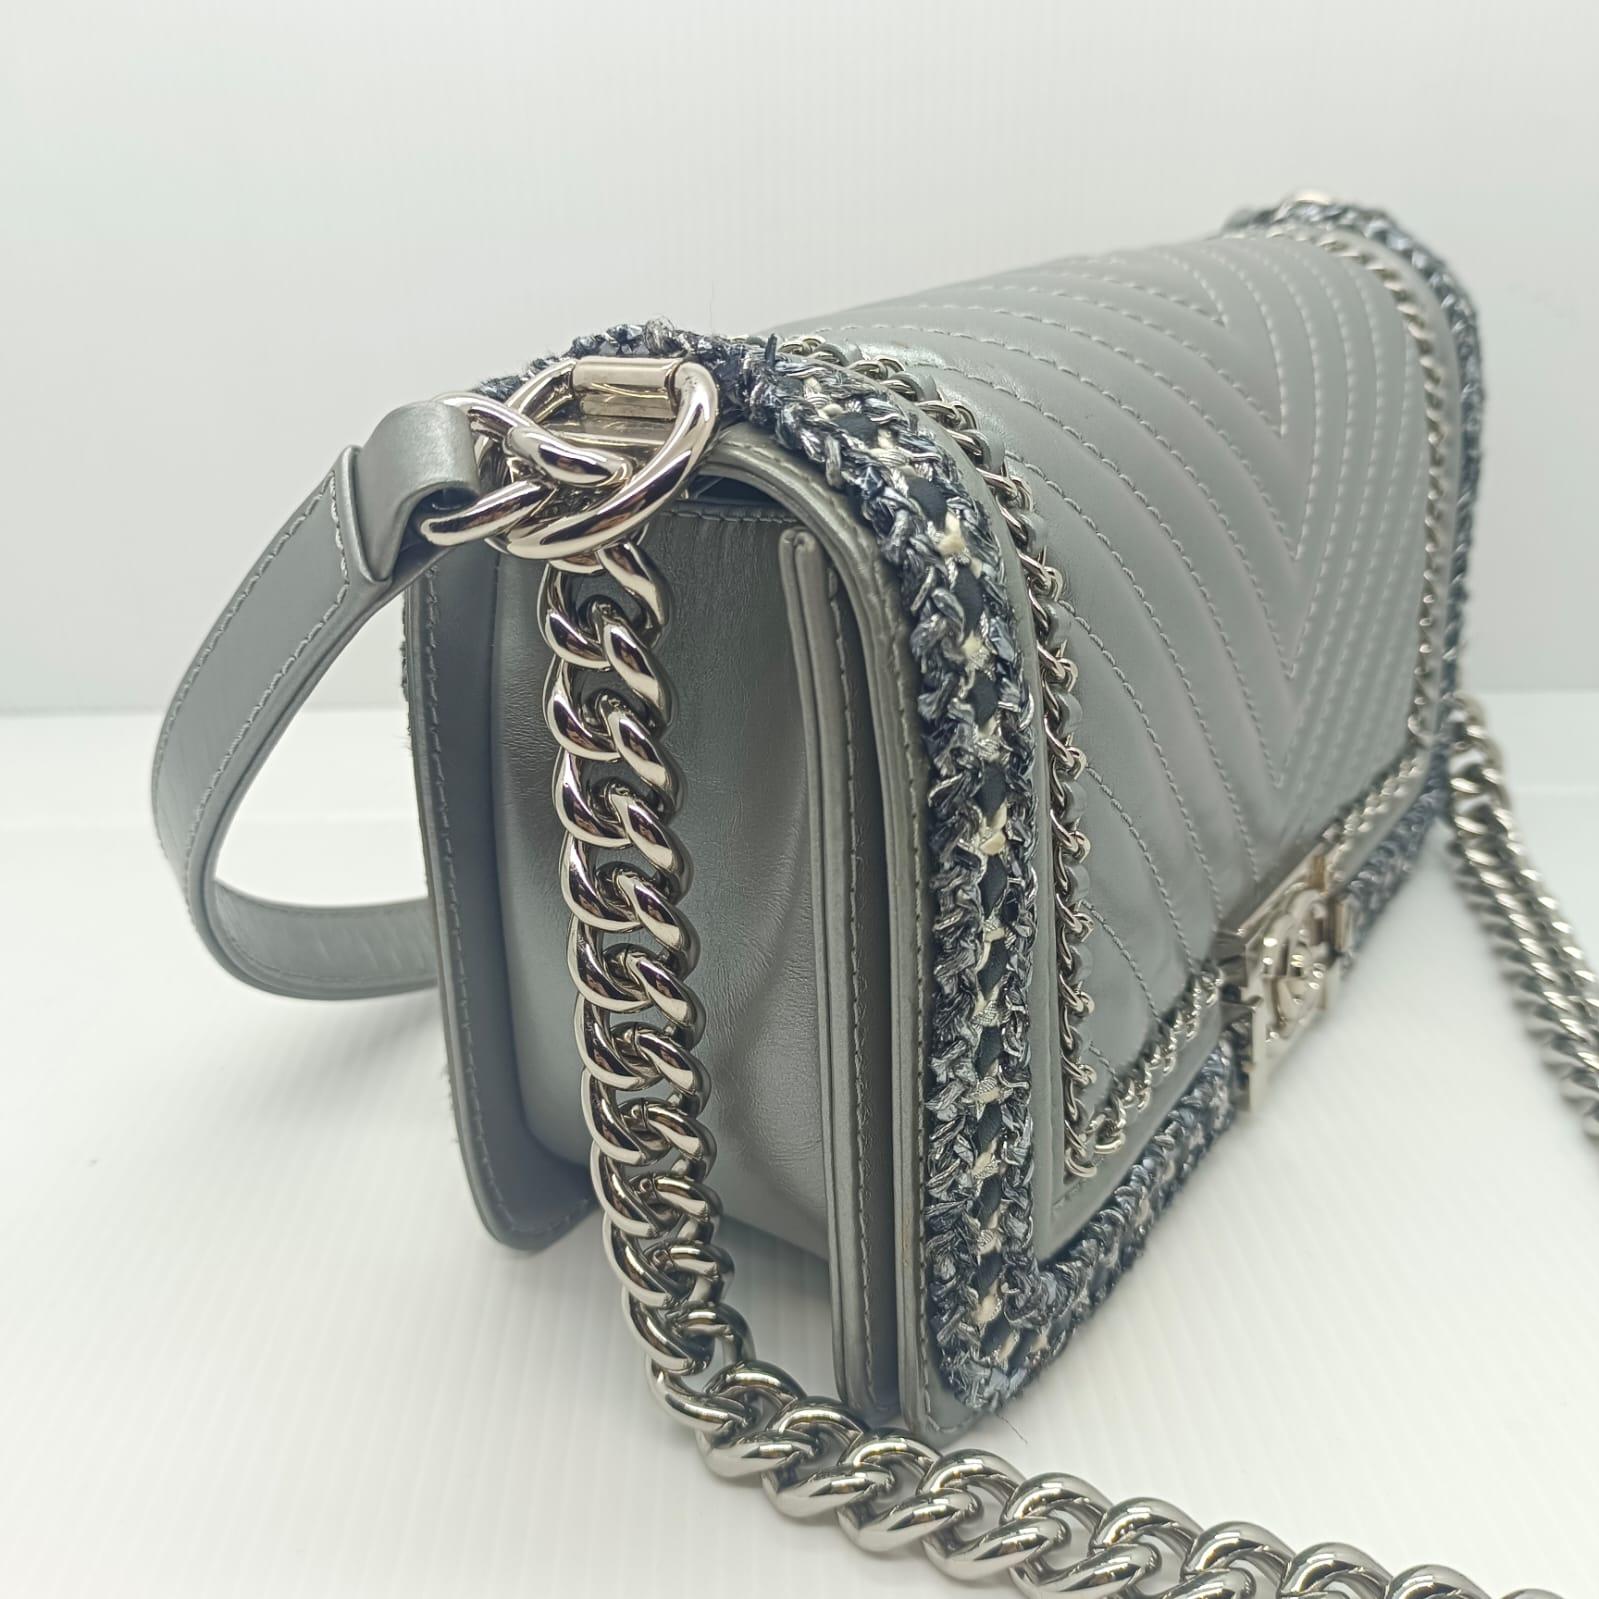 Chanel Metallic Silver Chevron Quilted and Chain Trimmed Old Medium Boy Bag For Sale 1